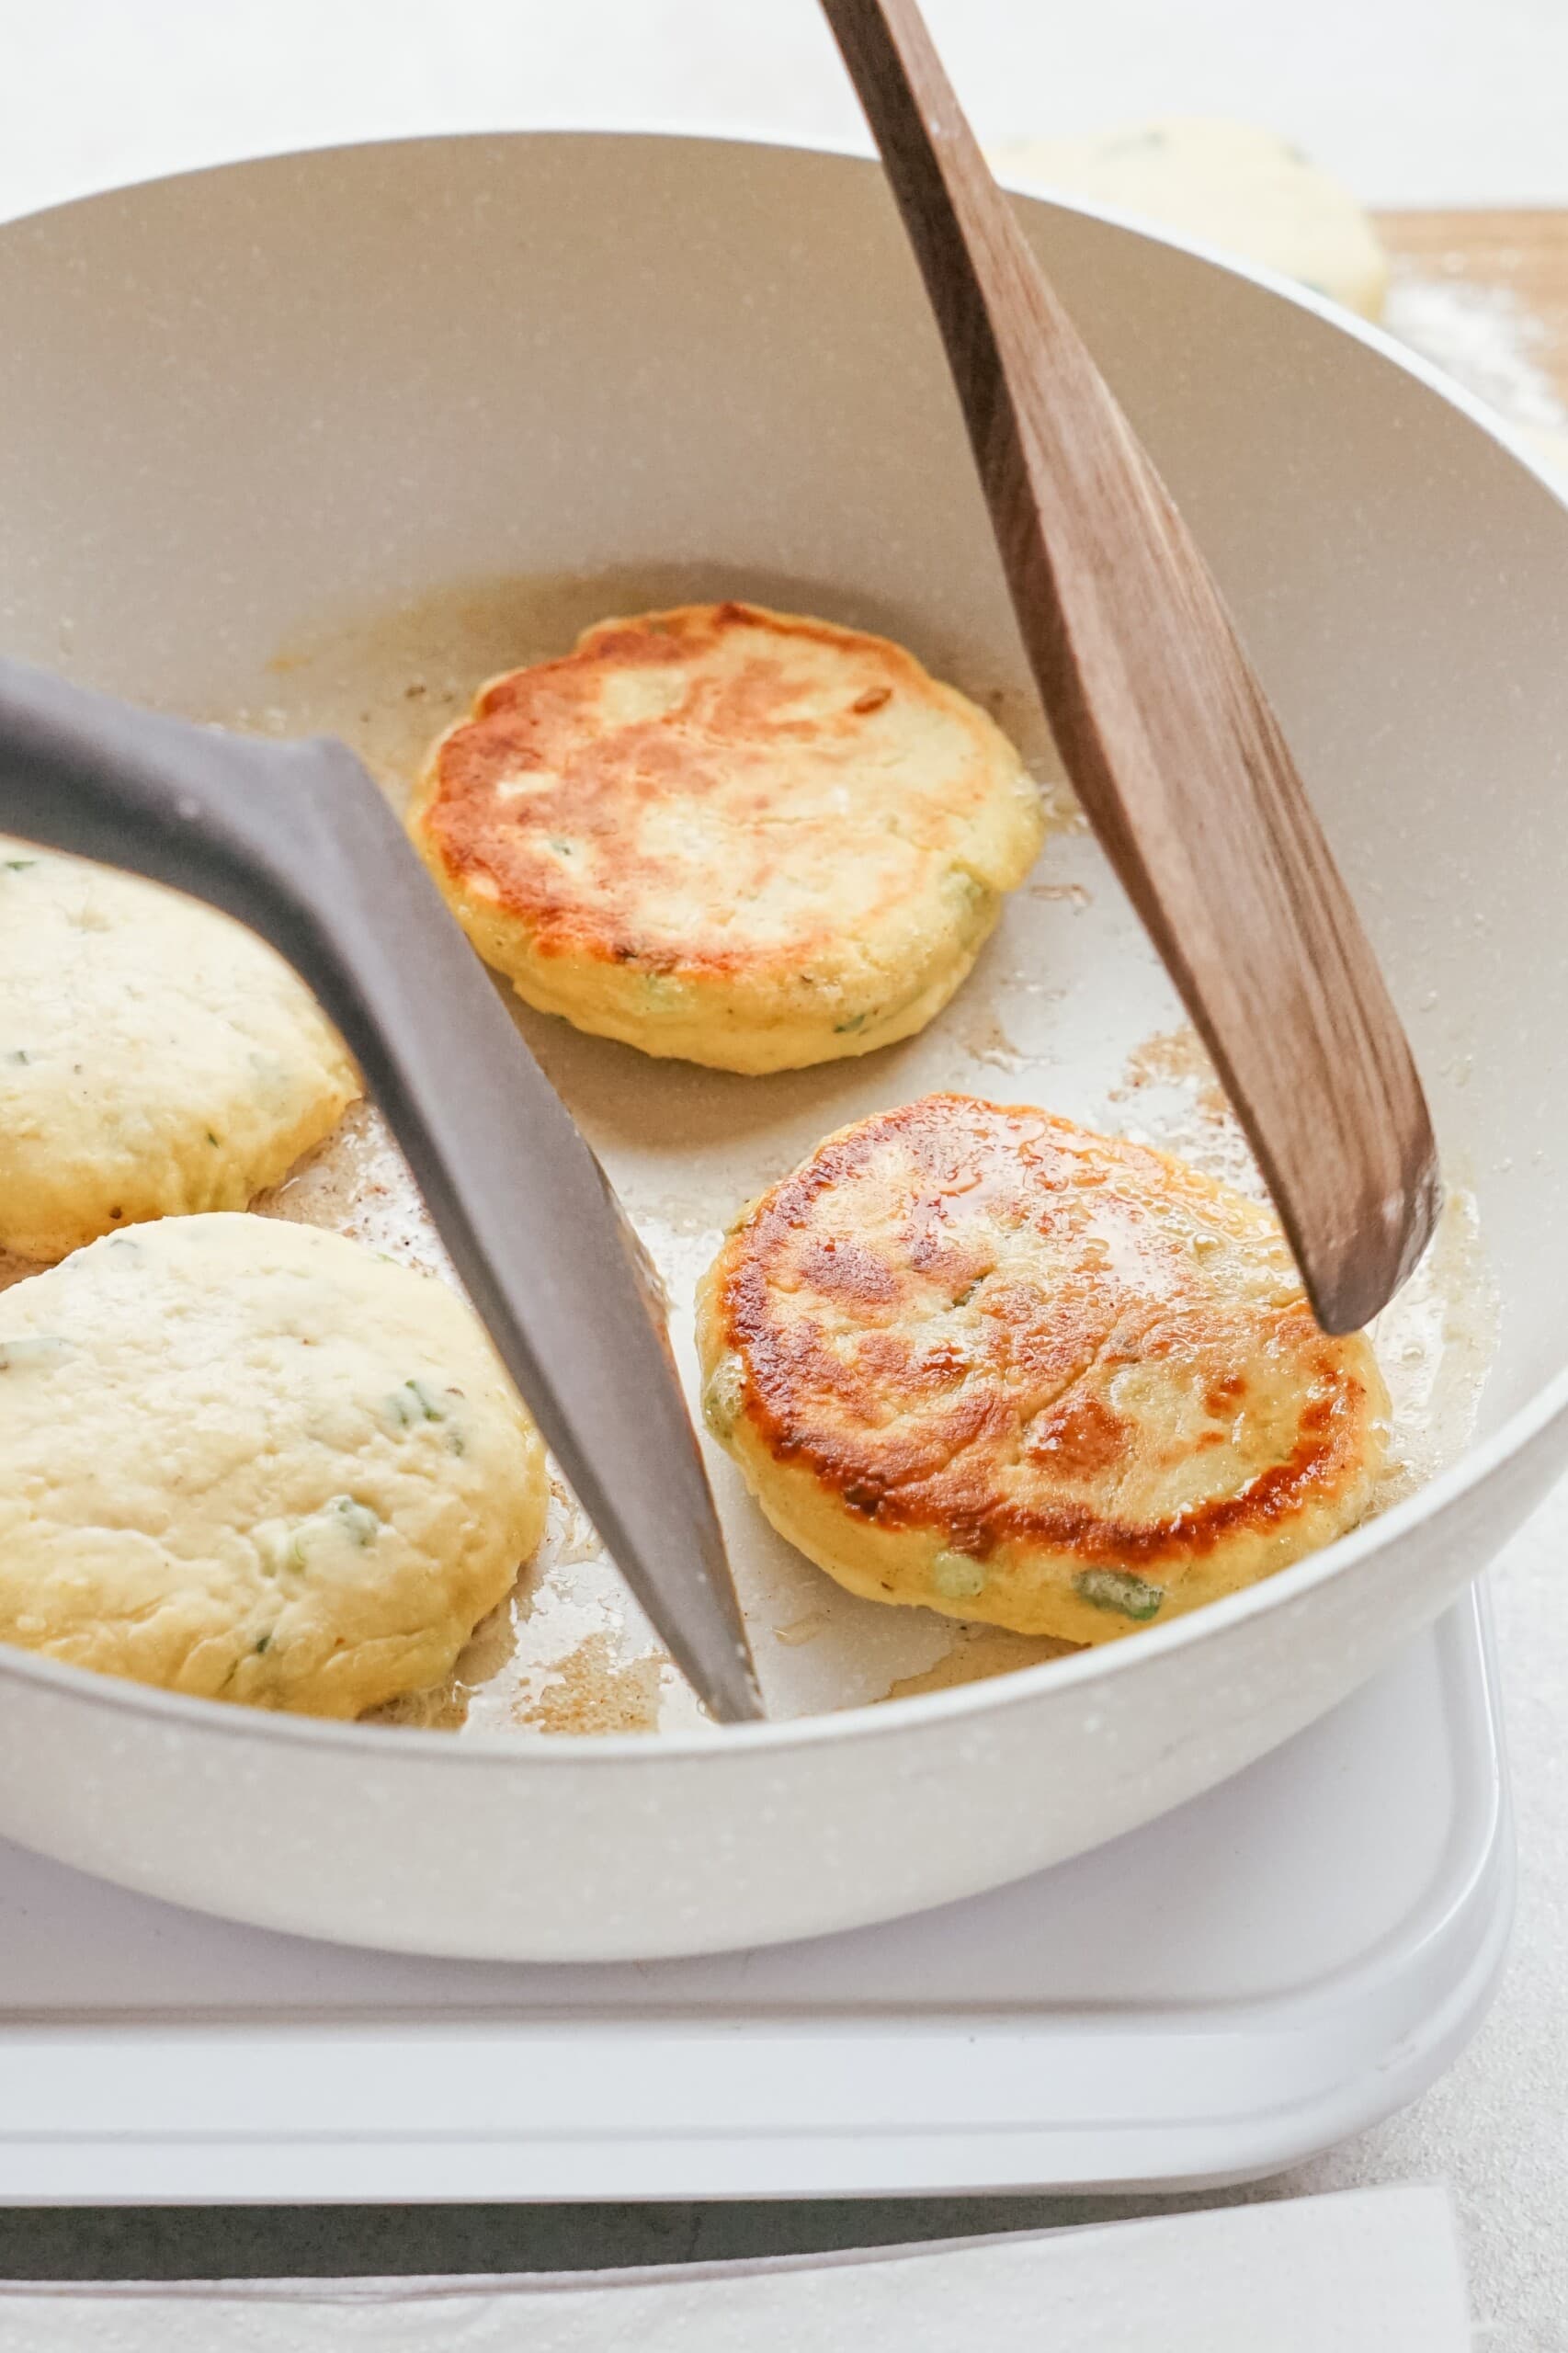 gently flipping over potato patties in the skillet